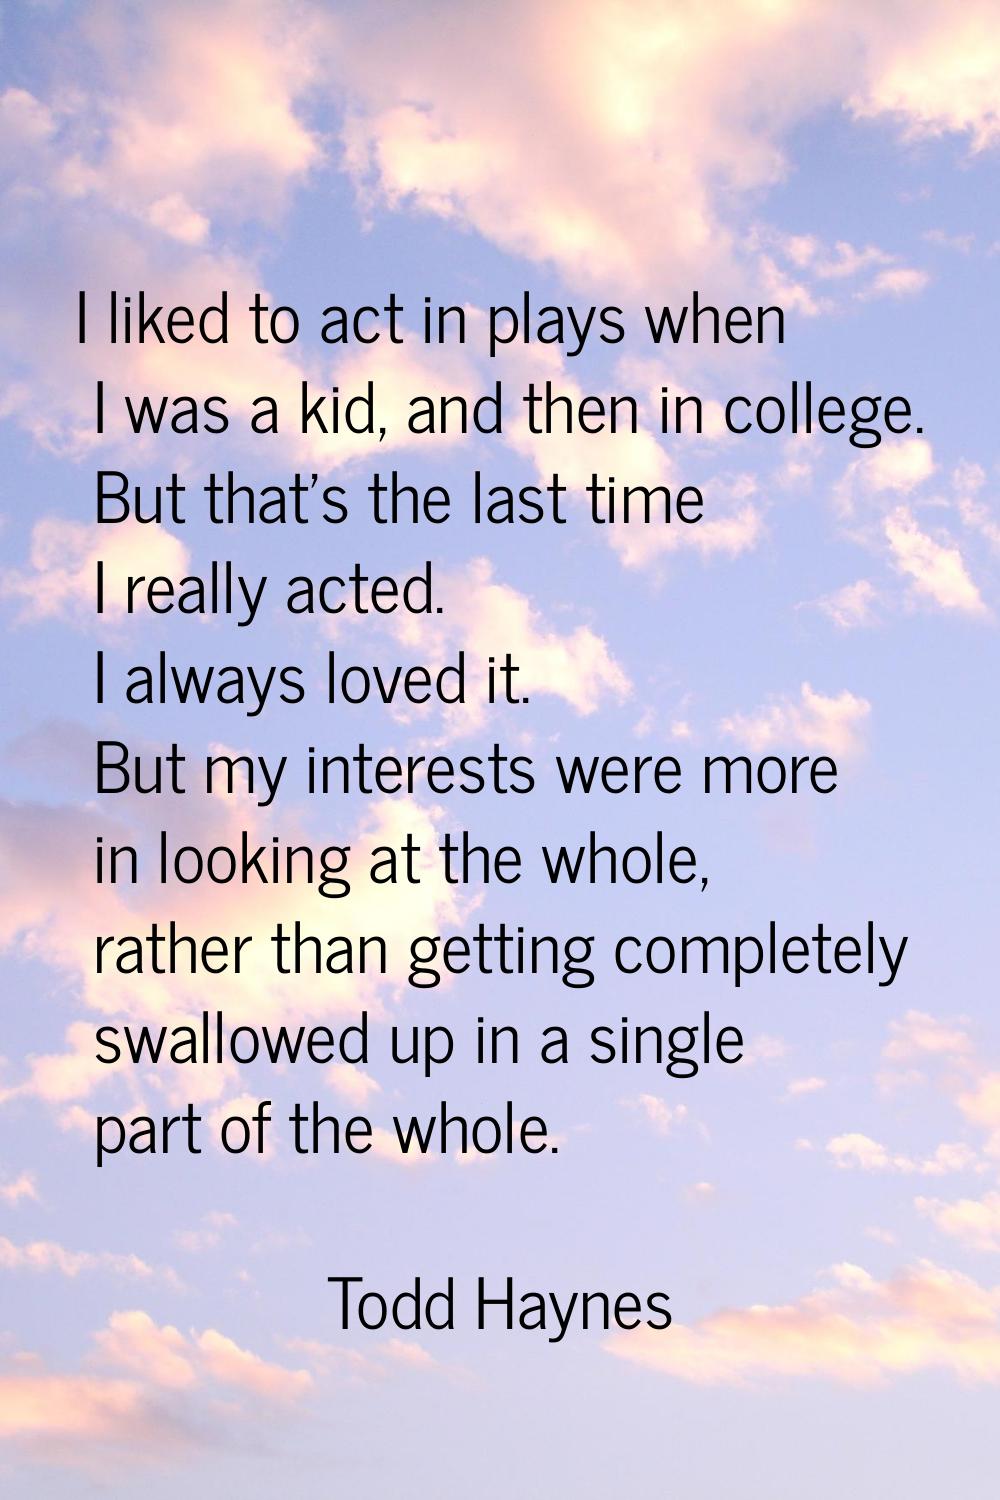 I liked to act in plays when I was a kid, and then in college. But that's the last time I really ac